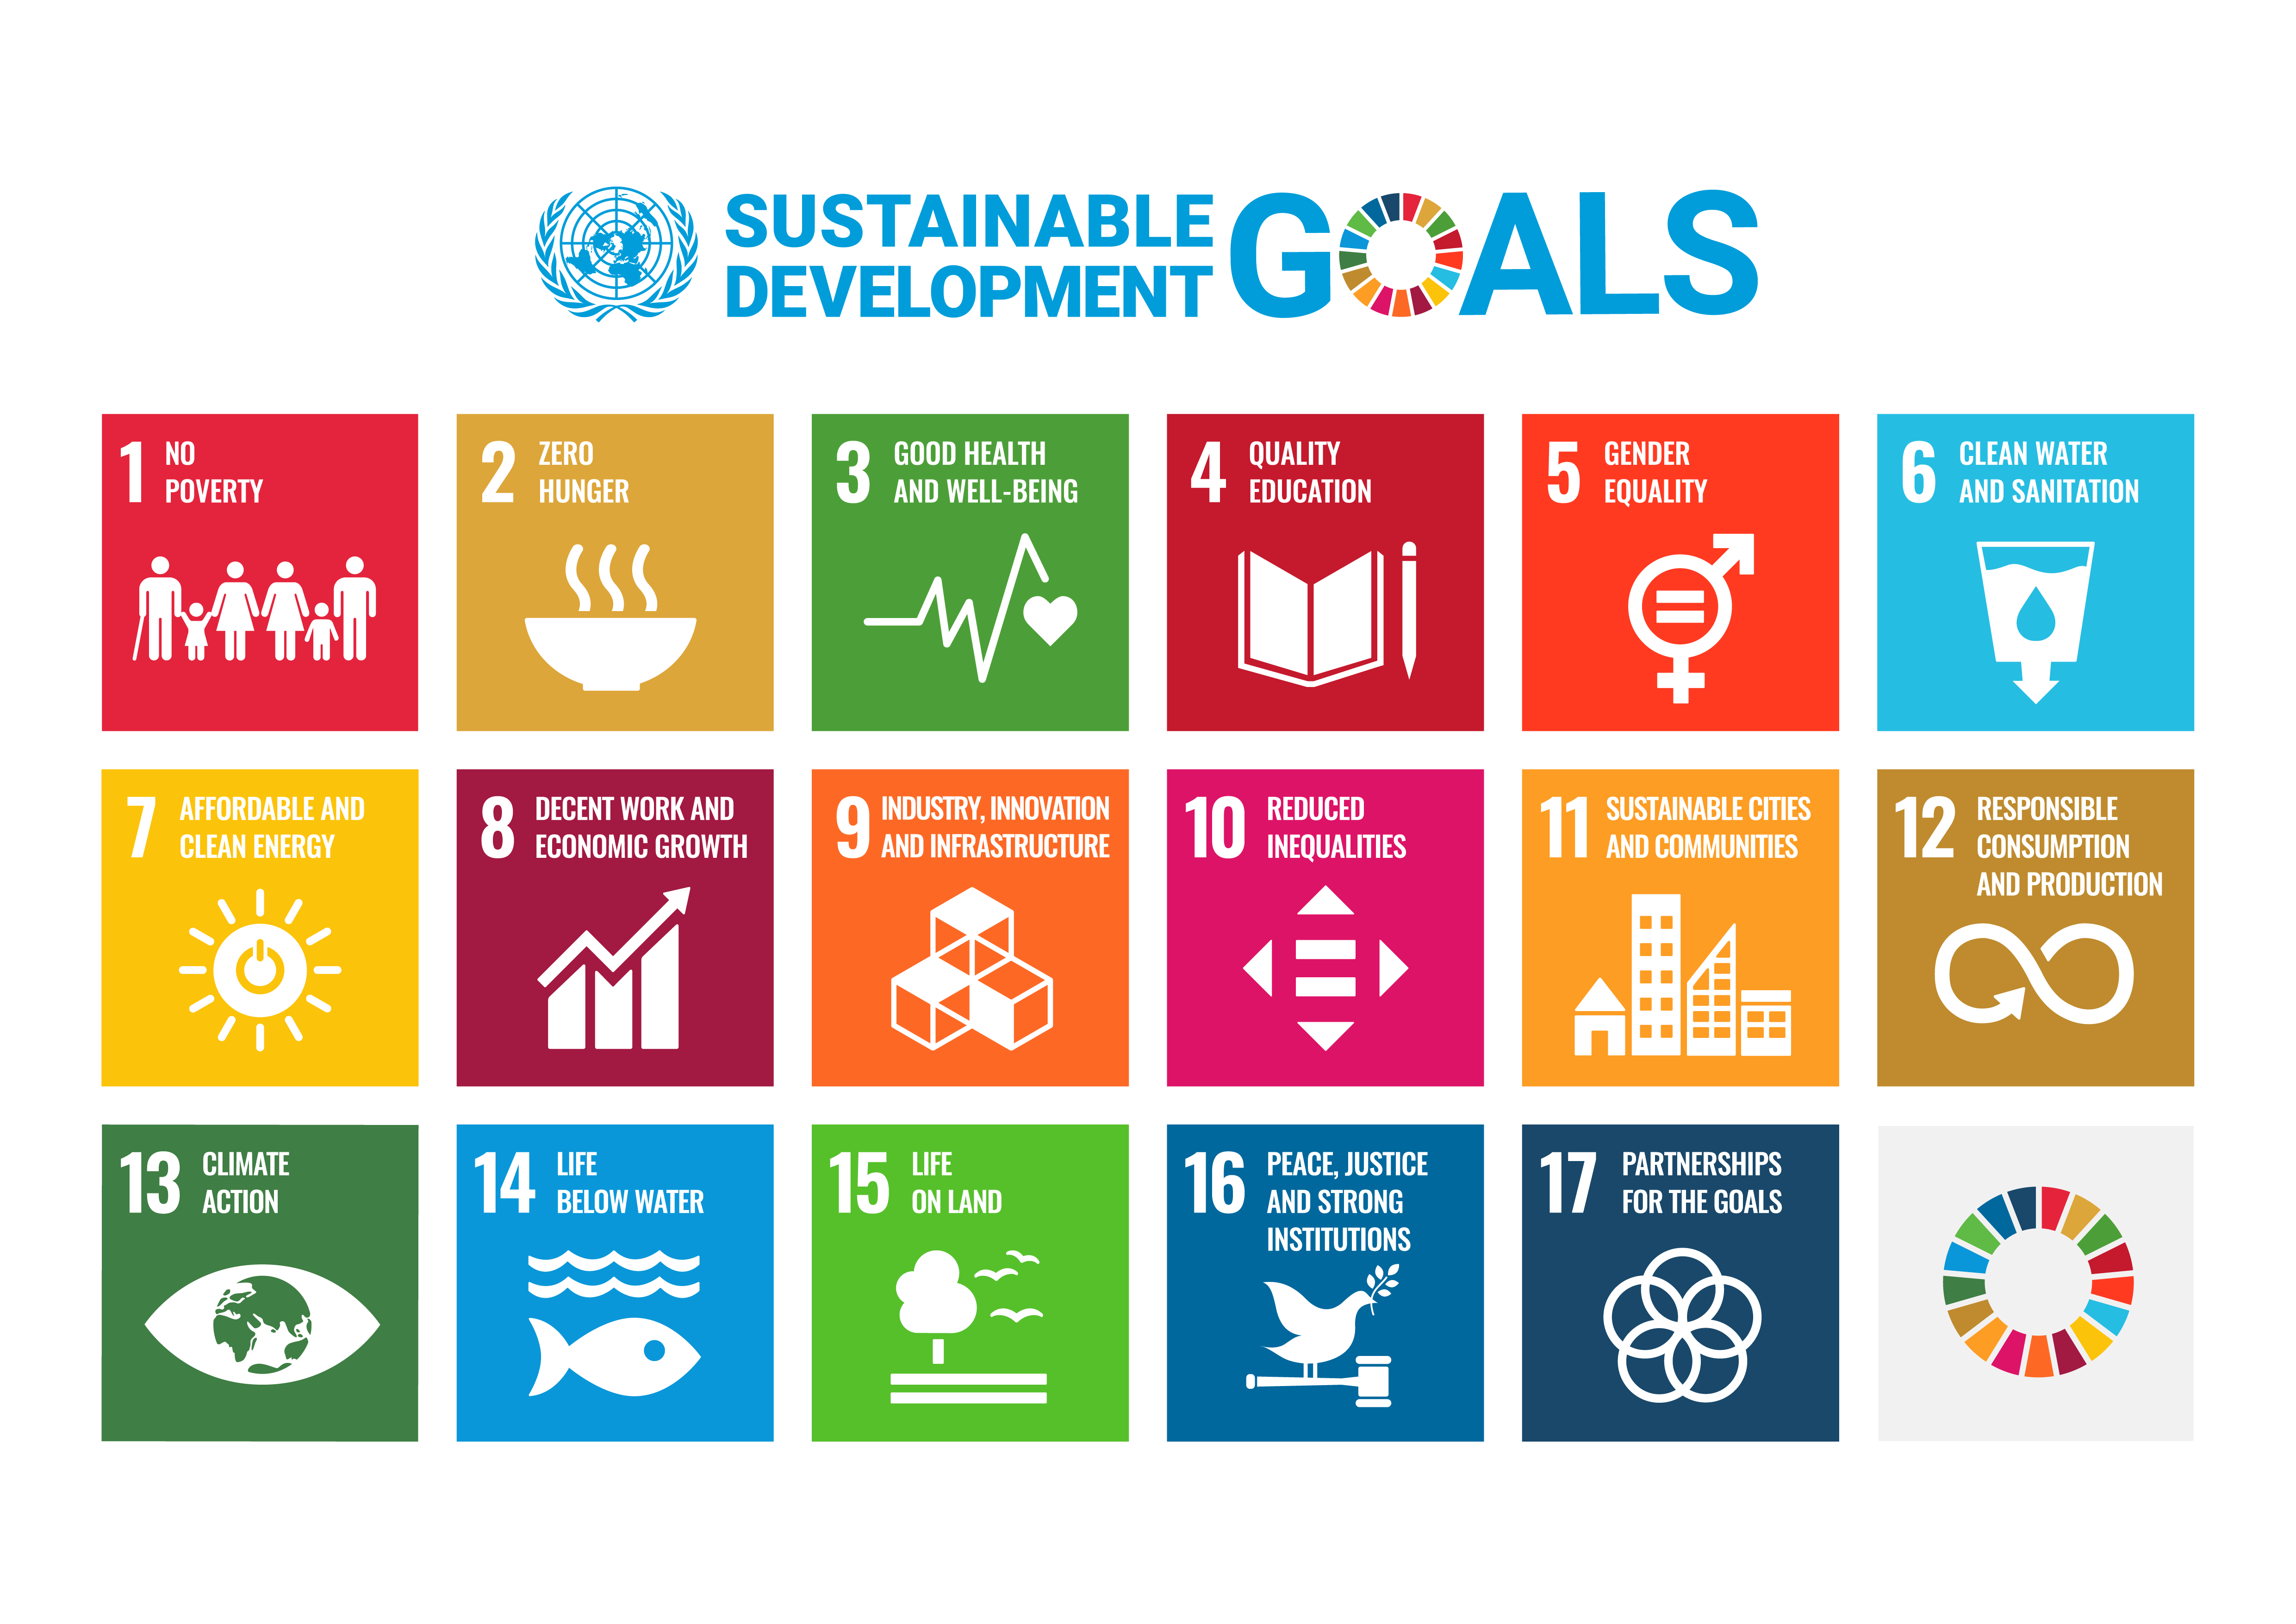 17 UN Sustainability Goals shown as icons: